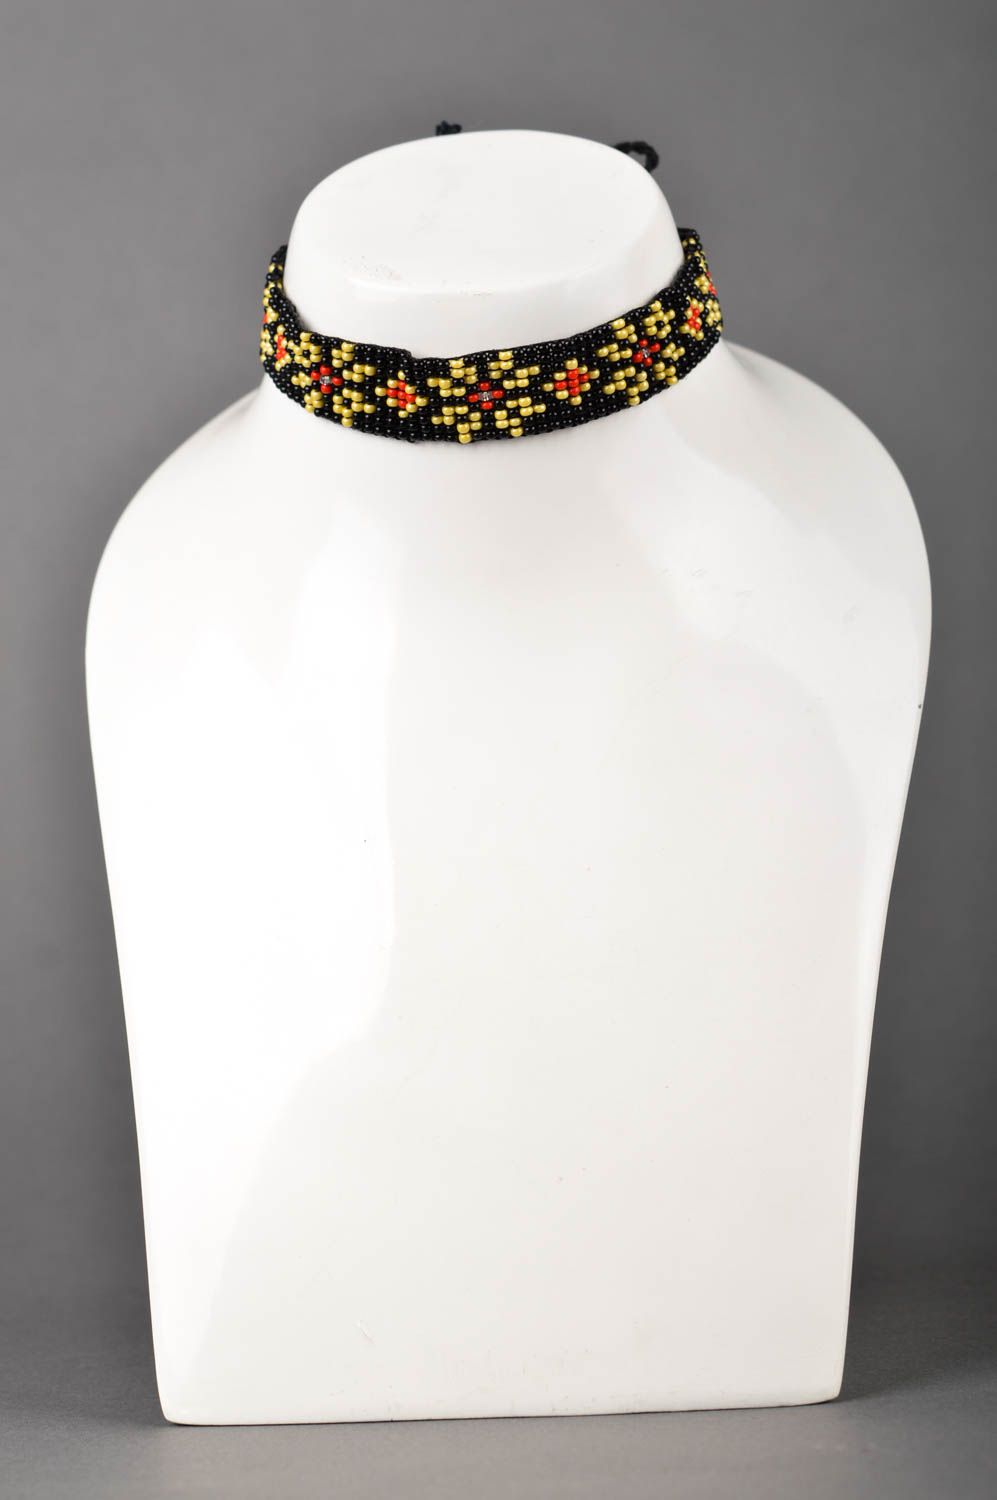 Handmade elegant necklace jewelry in ethnic style unusual wide necklace photo 1